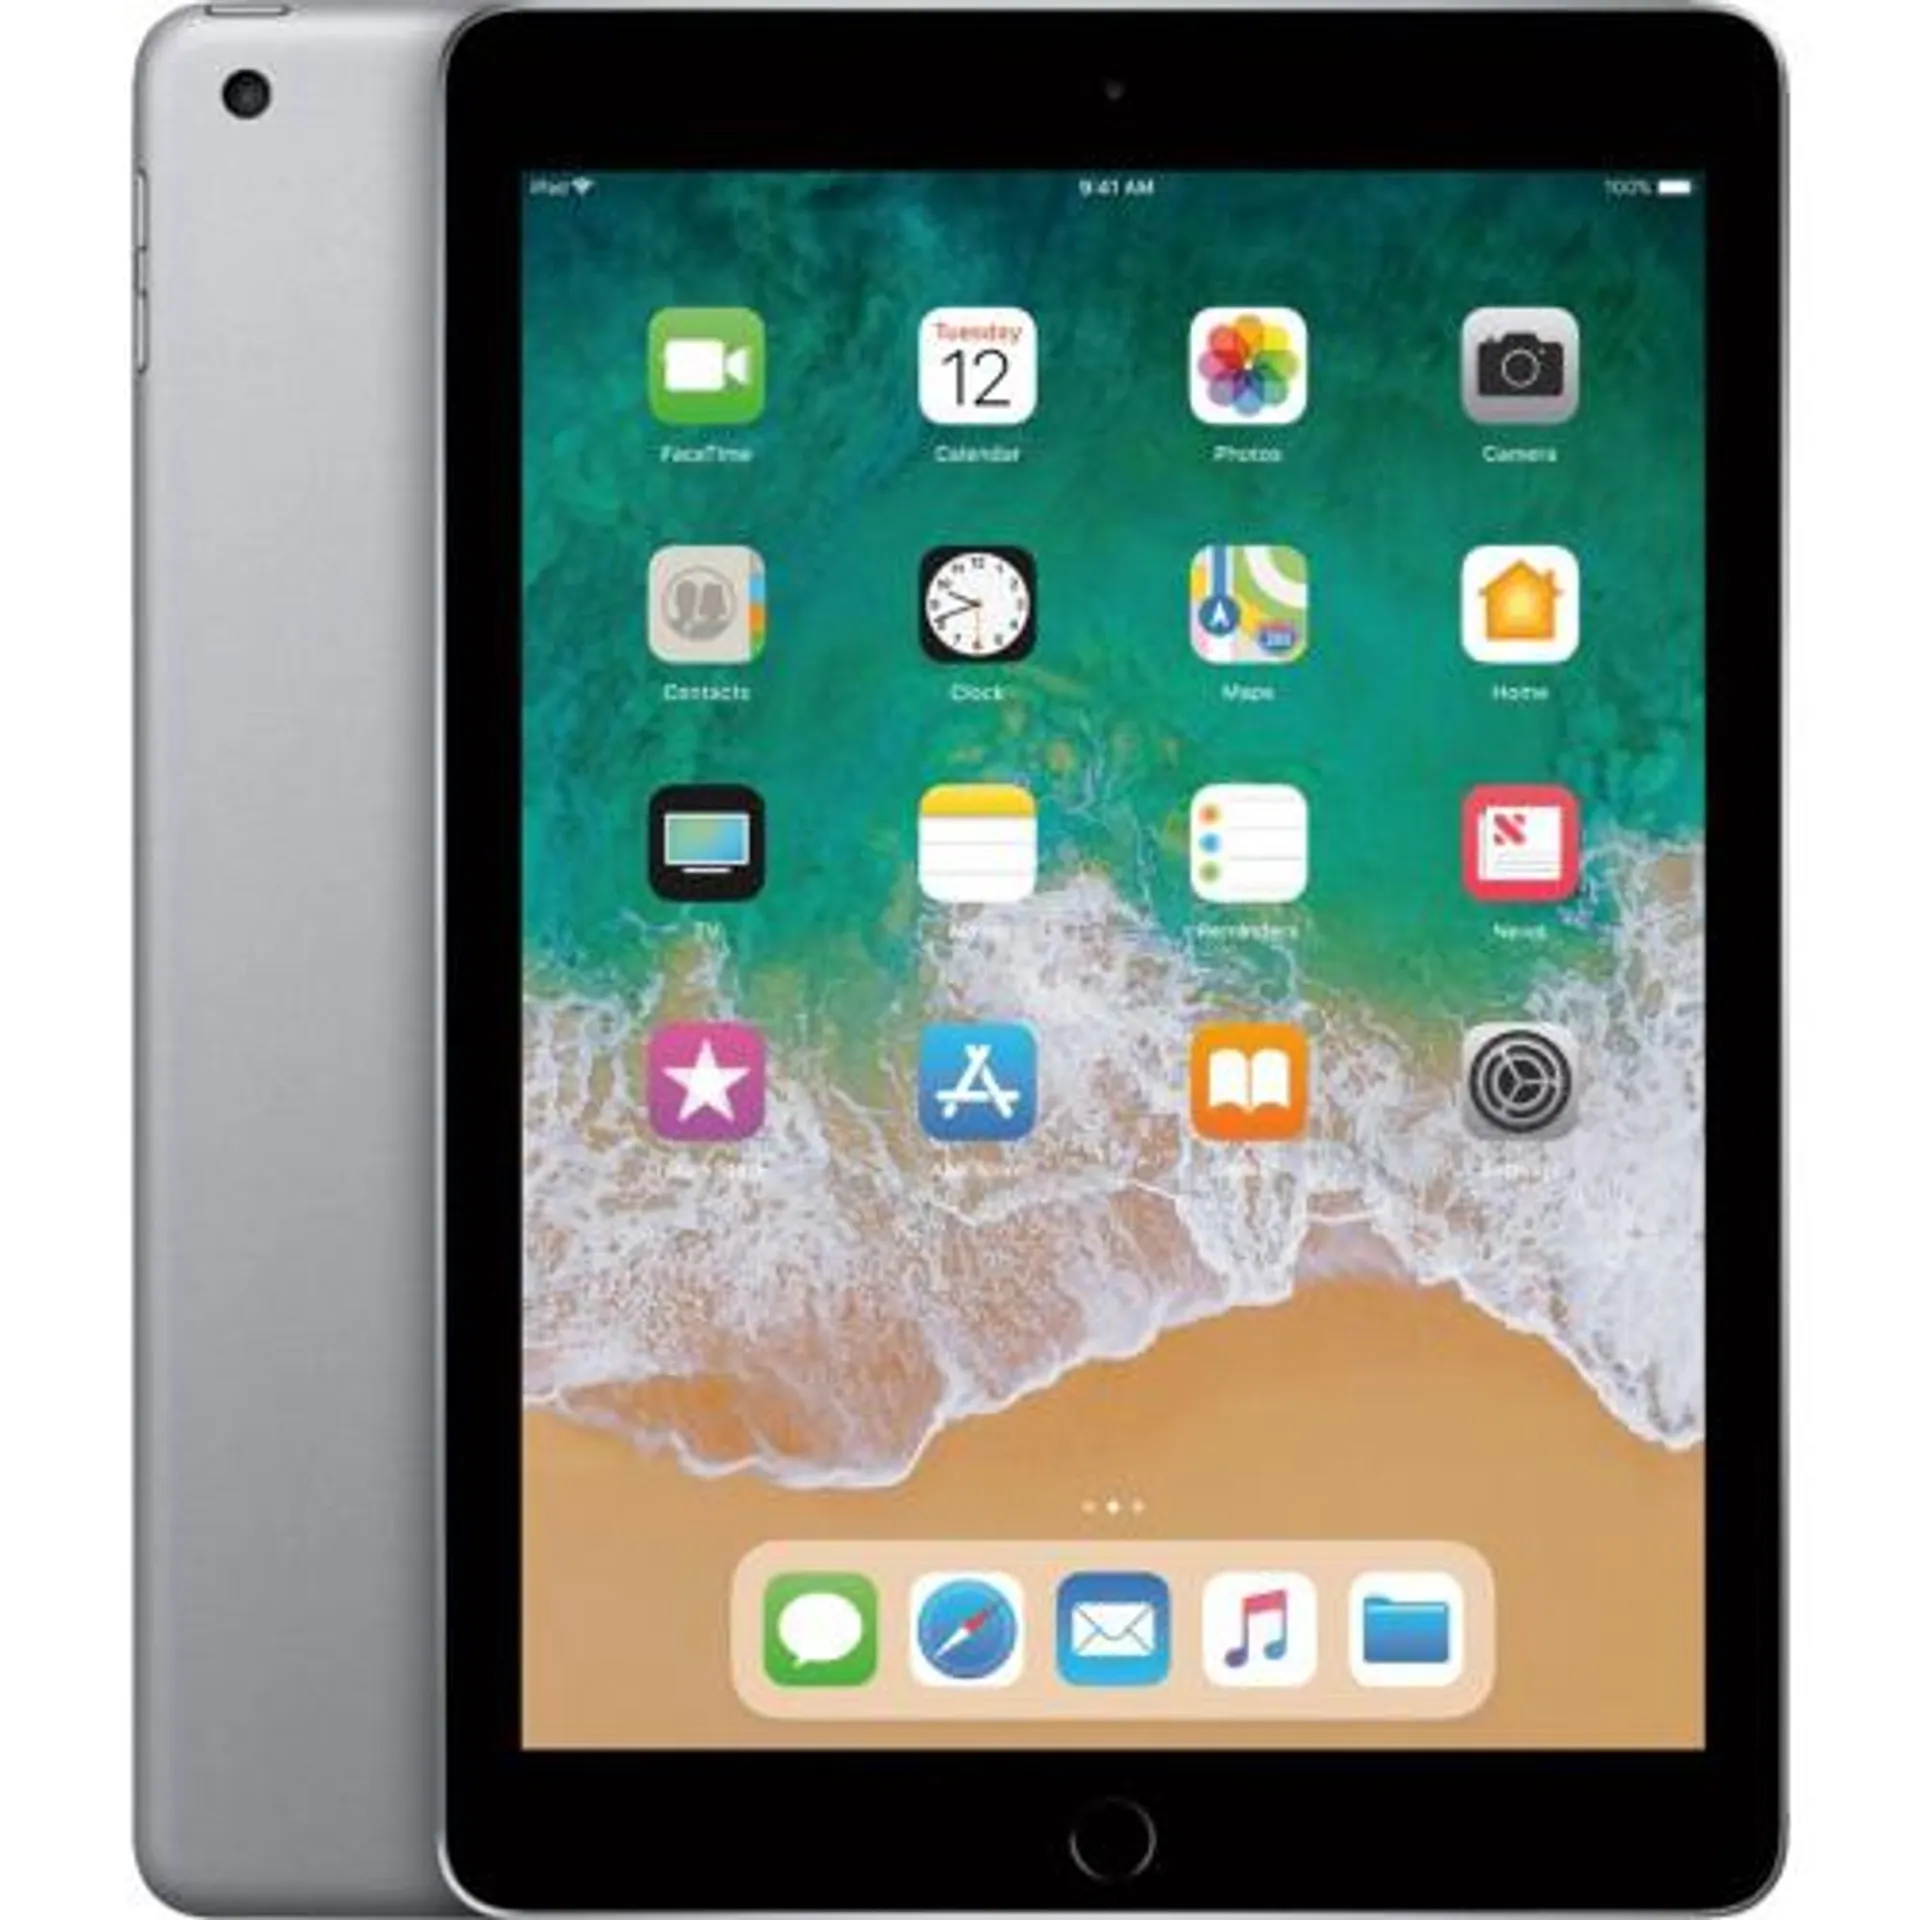 Refurbished (Excellent) - Apple iPad 9.7" screen 32GB - WiFi (5th Gen. 2017 - A1822) Space Gray - Certified Refurbished